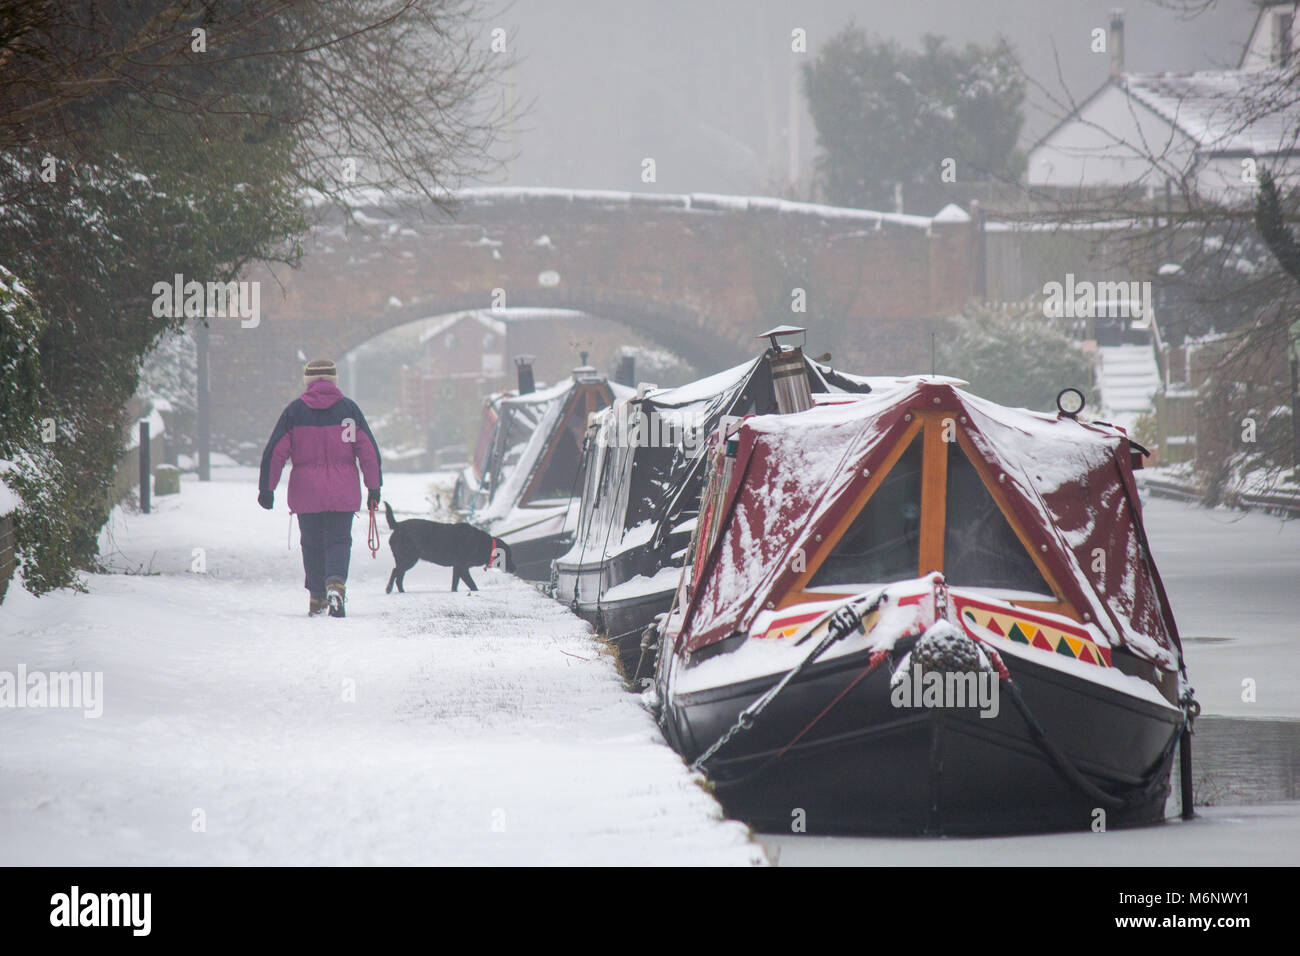 Canal boats, barges, narrow boats covered in snow on the Coventry canal, near Atherstone, Warwickshire Stock Photo